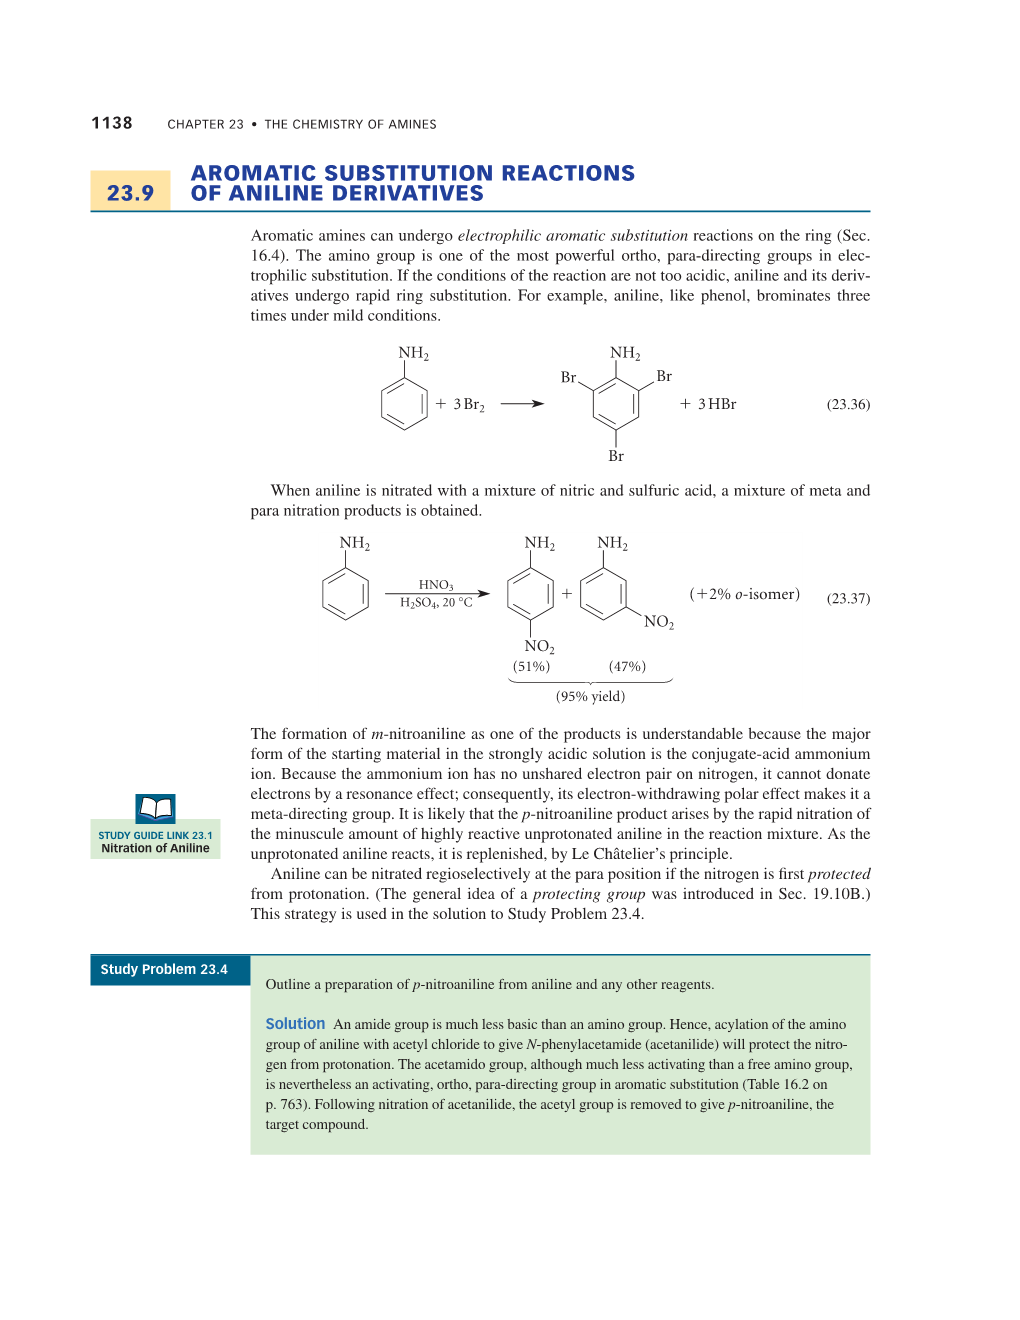 23.9 Aromatic Substitution Reactions of Aniline